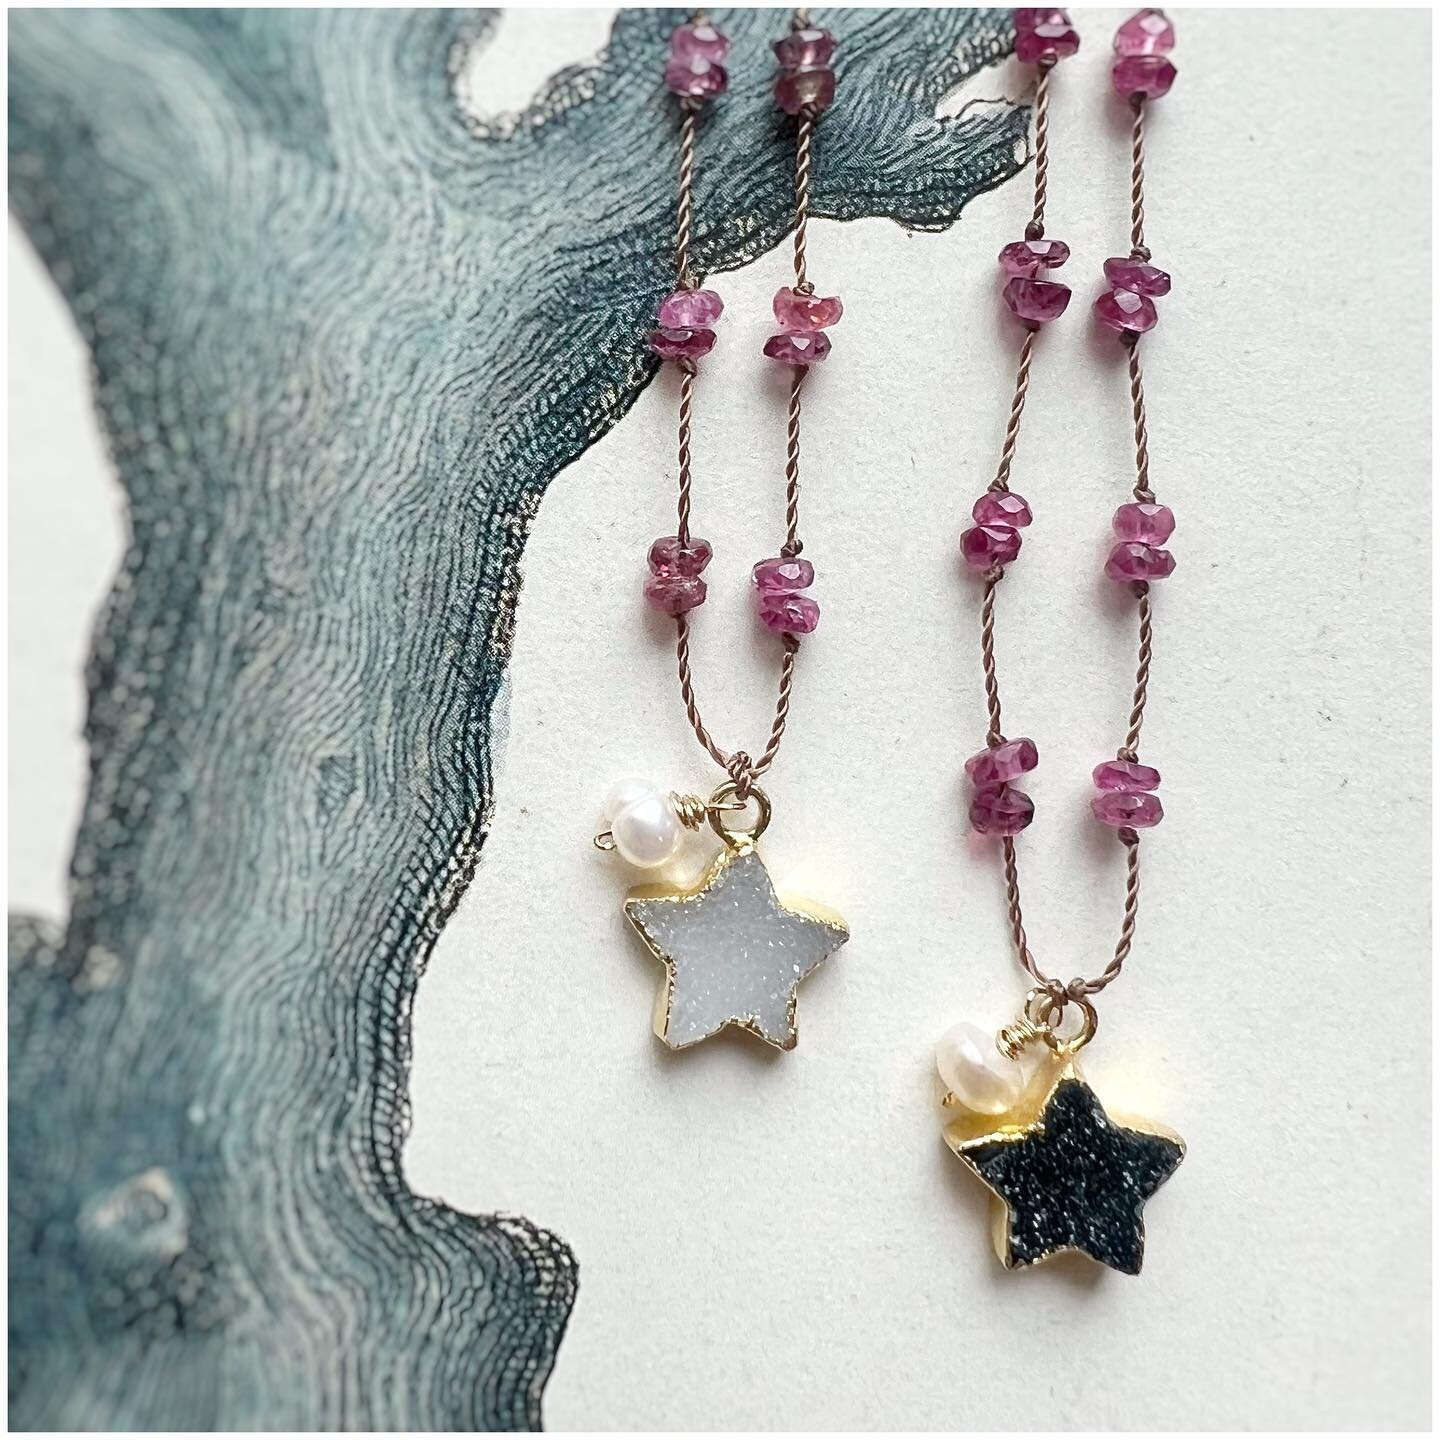 Hi Friends, Happy Friday!! So I've been wanting a little splash of pink for spring ...I love pink in the spring!!! Hunting down the right shade brought me to these beautiful Ombr&eacute; array of Pink Tourmalines !! Adding the little reversible druzy